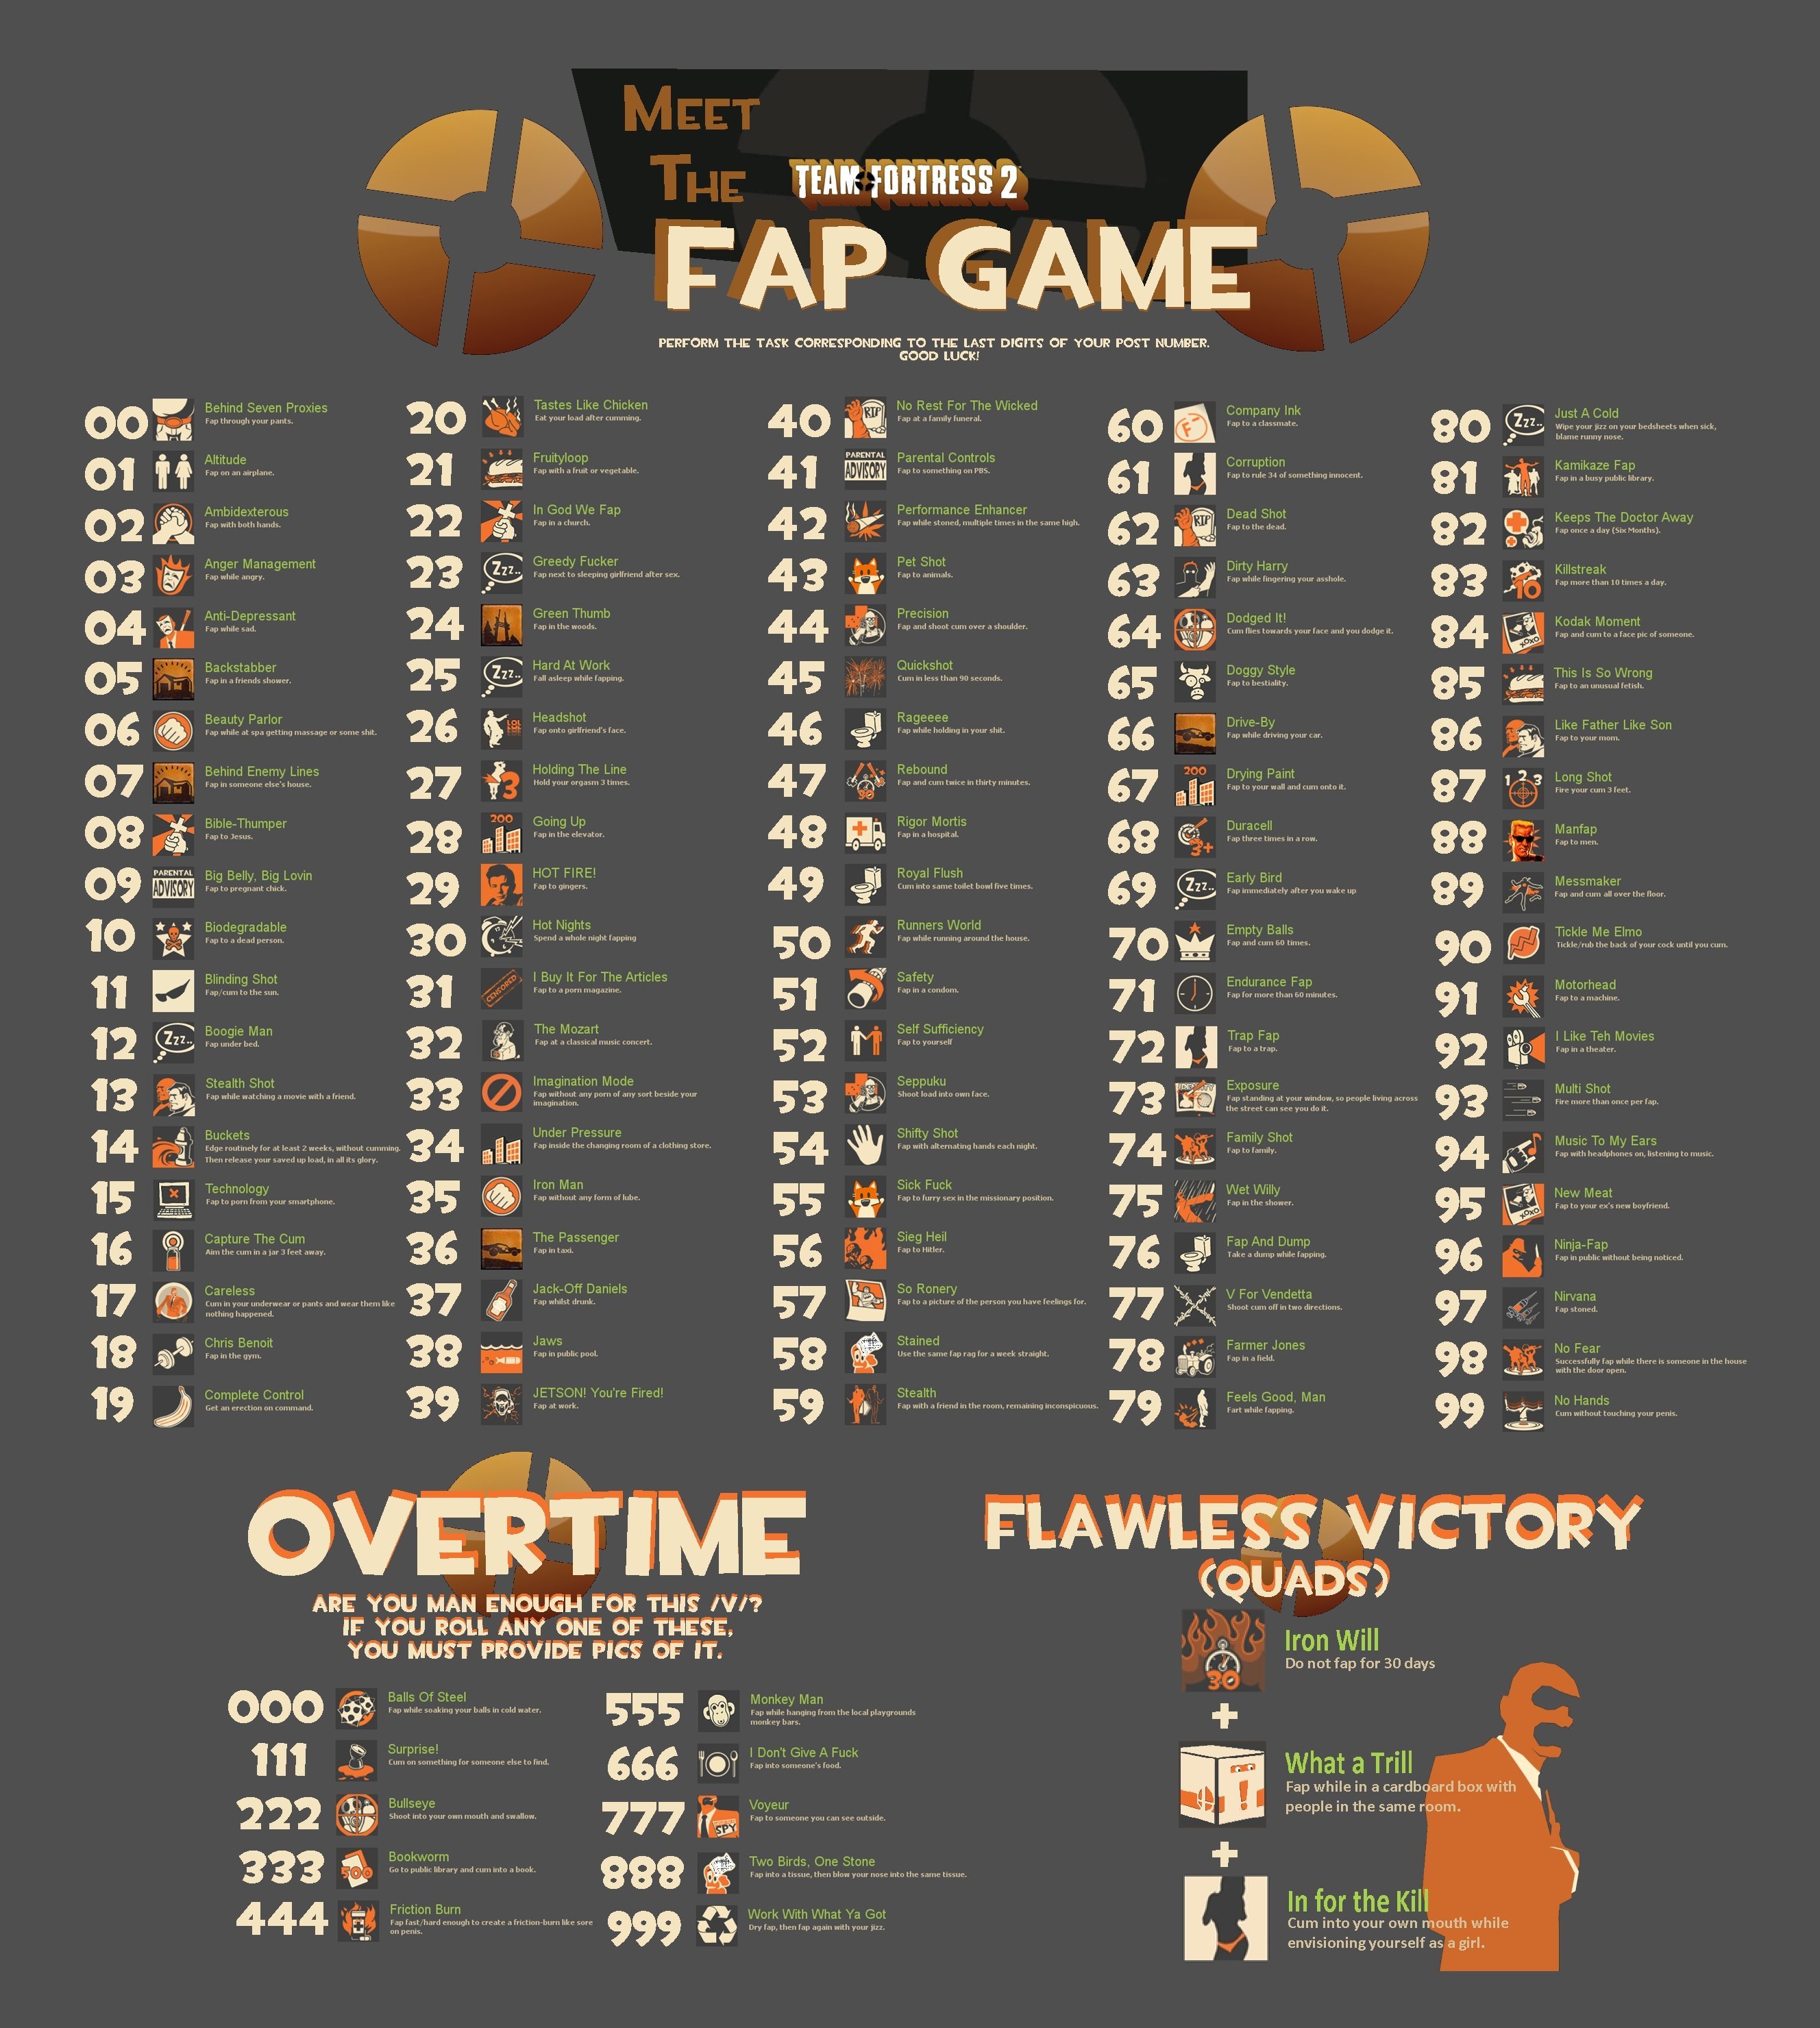 the fap game.